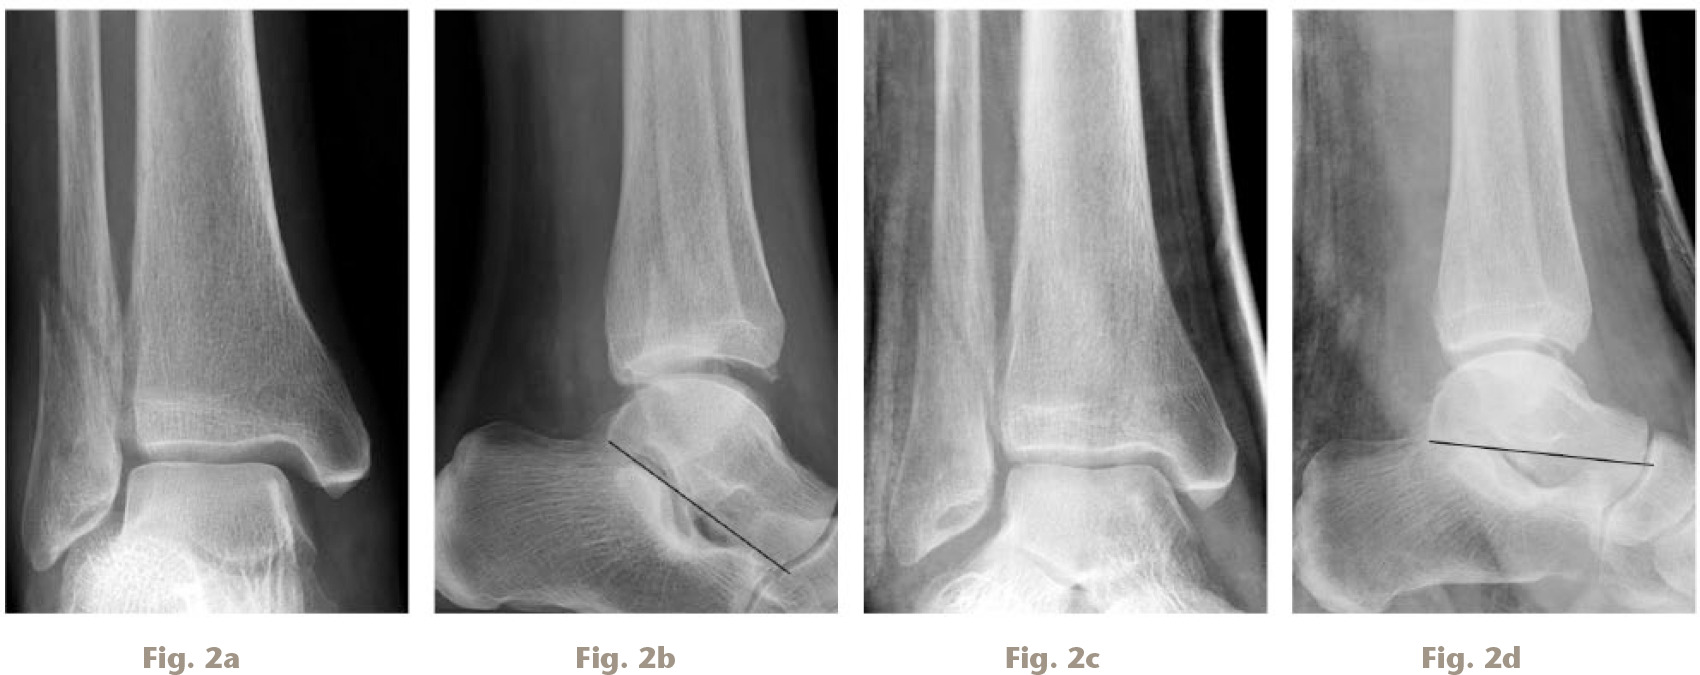 Fig. 2 
          a) Anteroposterior ankle radiograph demonstrating apparent talar shift with increased medial clear space. b) Lateral ankle radiograph of the same patient, demonstrating plantar flexion of the talus, with the smaller posterior aspect of the talus articulating with the mortise. c) Anteroposterior radiograph of the same patient with the ankle now in d) a plantargrade (neutral) position with elimination of the initial apparent talar shift.
        